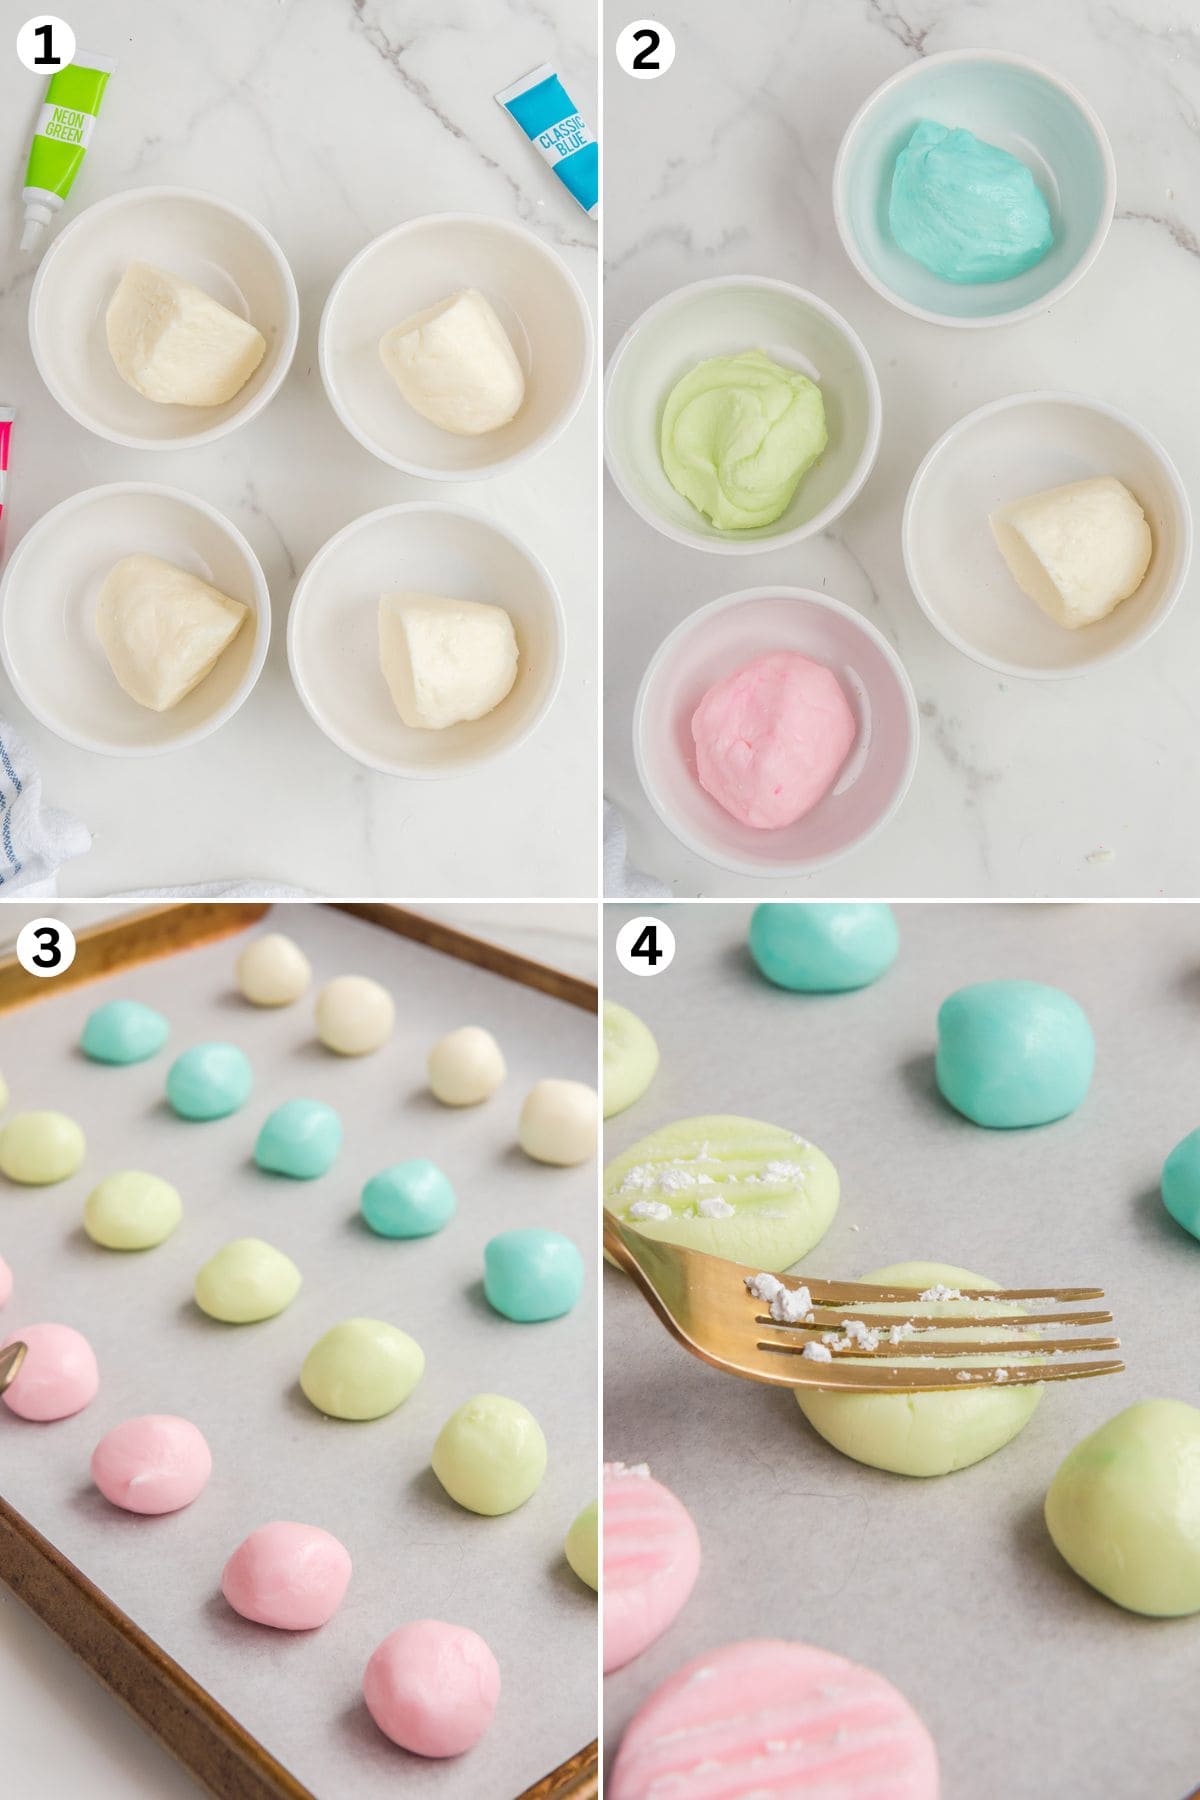 dough cut into 4 pieces and placed in a bowl. add food coloring to each dough. small ball of each colored dough lined up in baking sheet. flatten the dough with a fork.